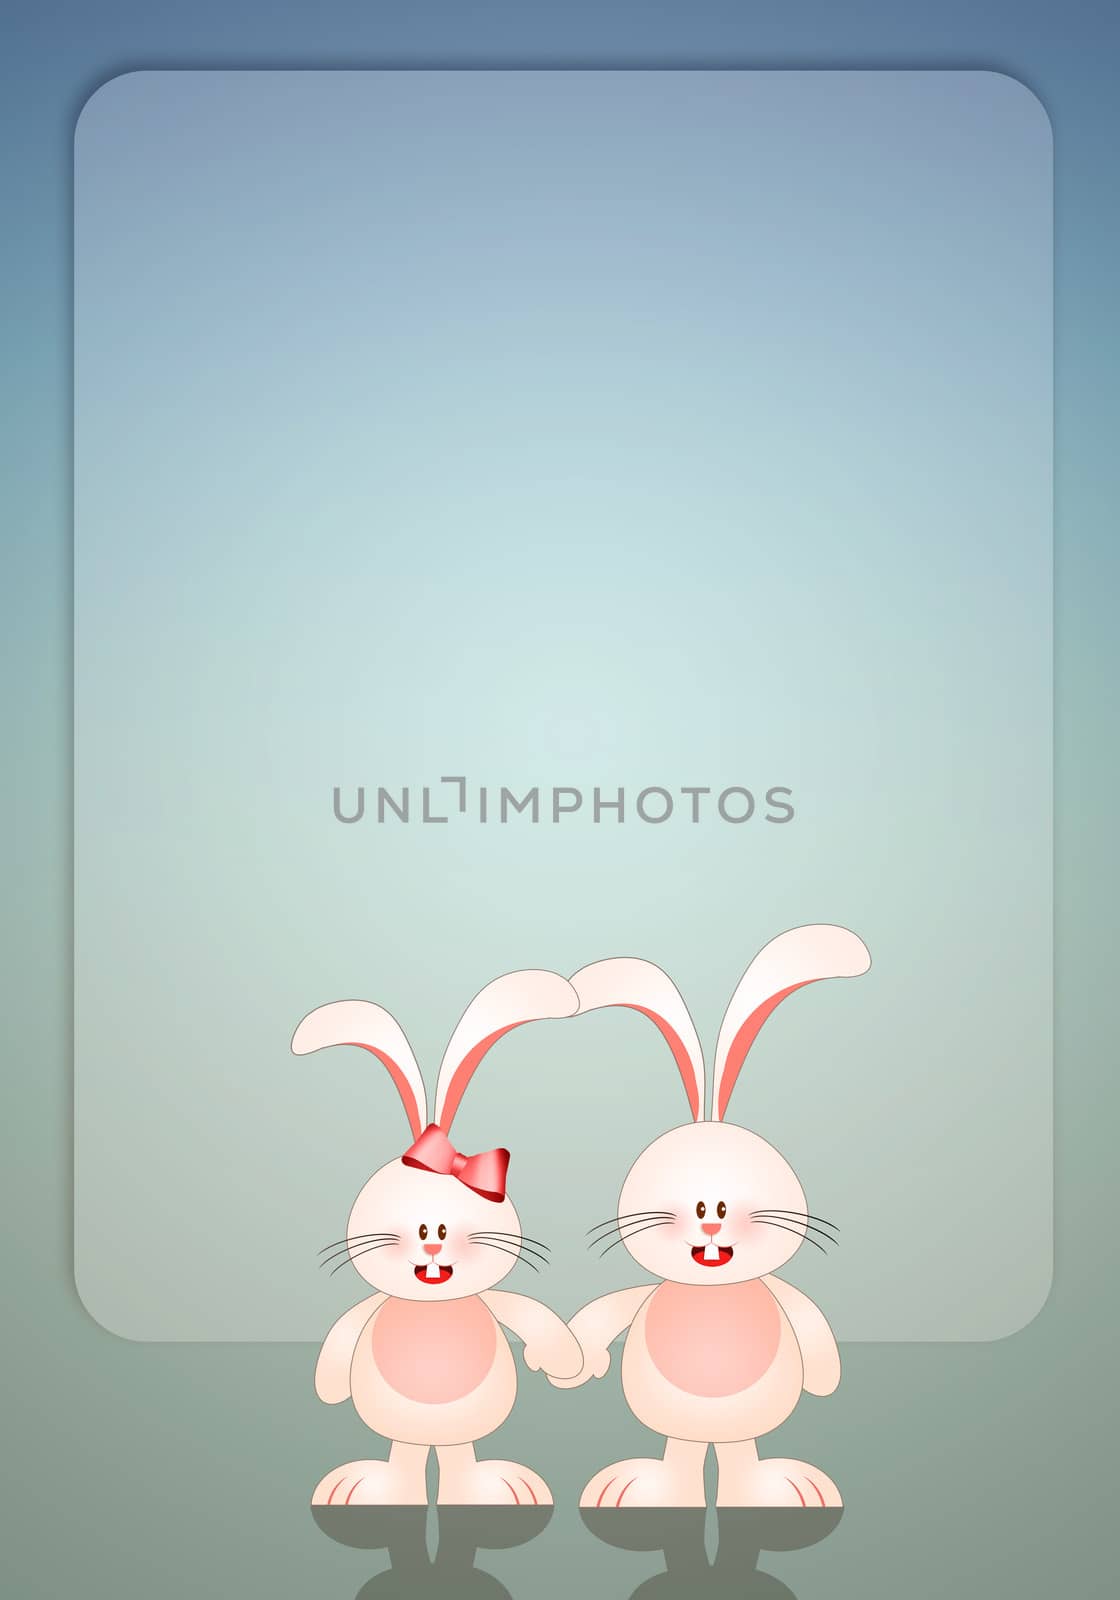 Two bunnies in love